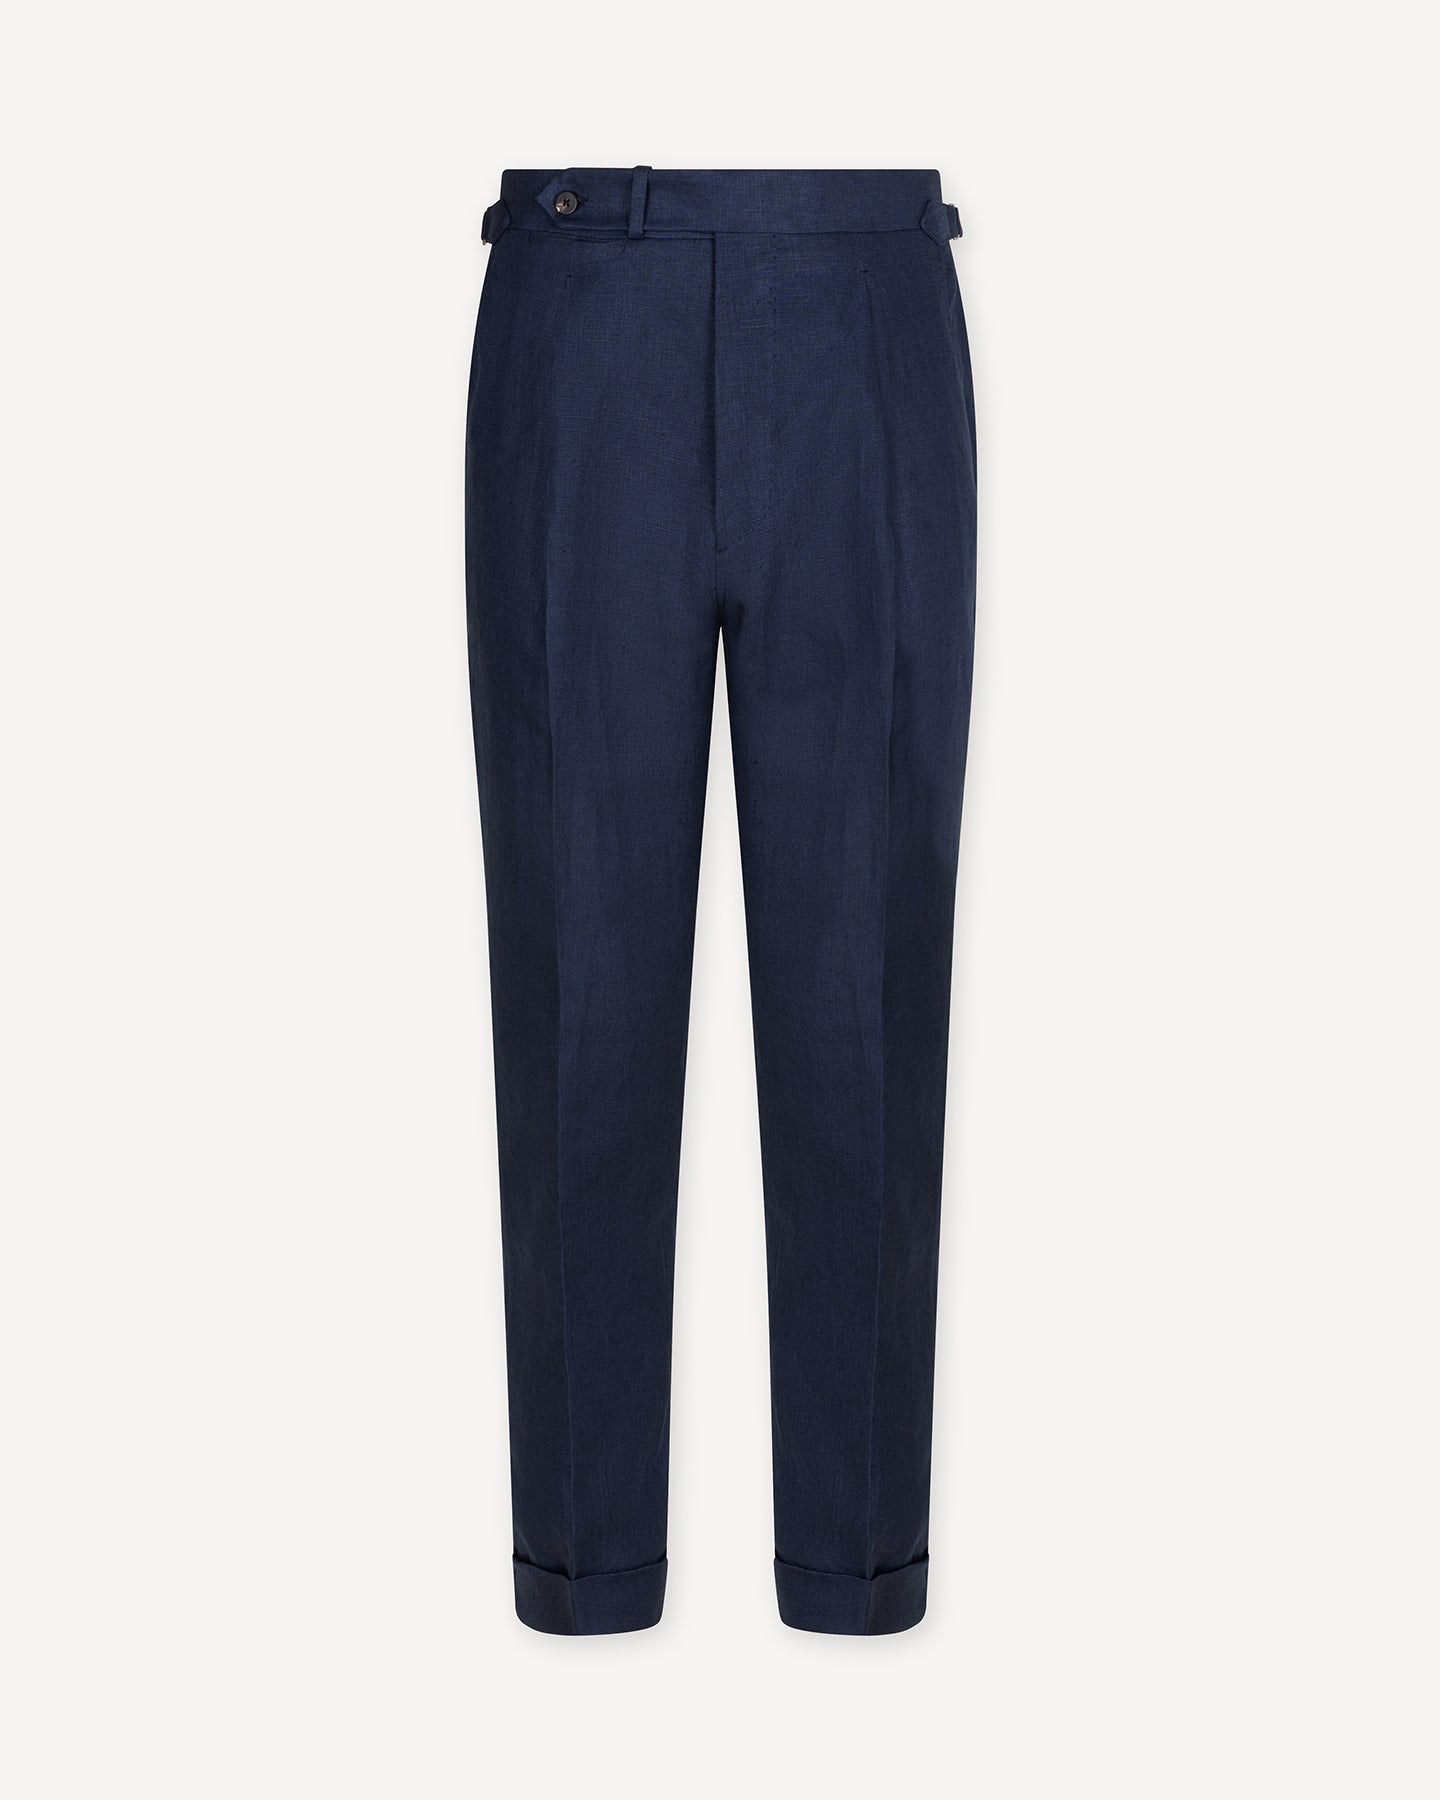 Navy linen trousers with single pleats and side adjusters